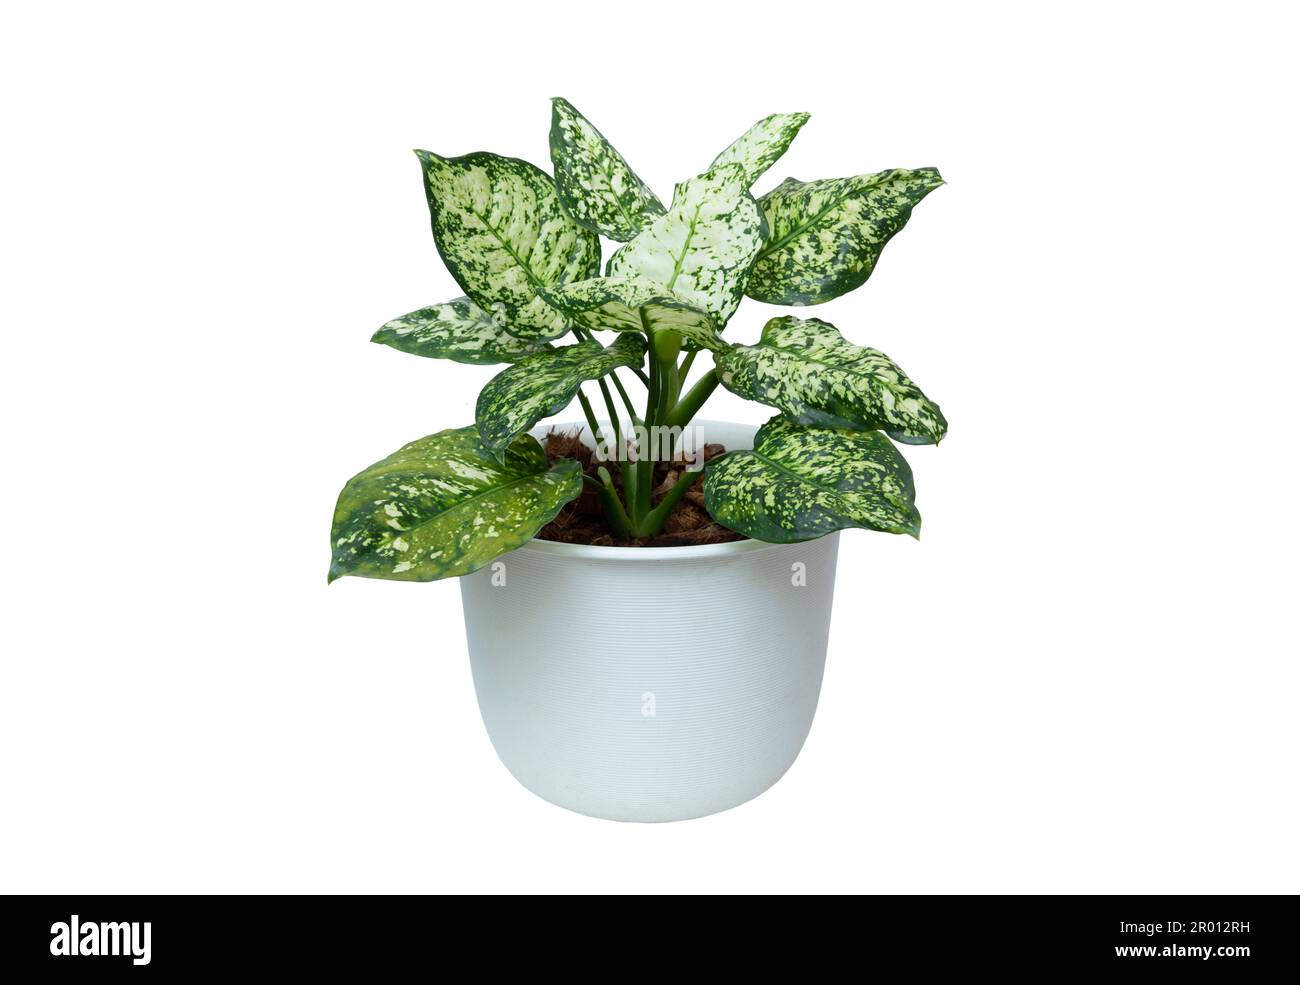 Aglaonema foliage, Spring Snow Chinese Evergreen) plant in white pot isolated on white background. Houseplant care concept. Indoor plant. Stock Photo